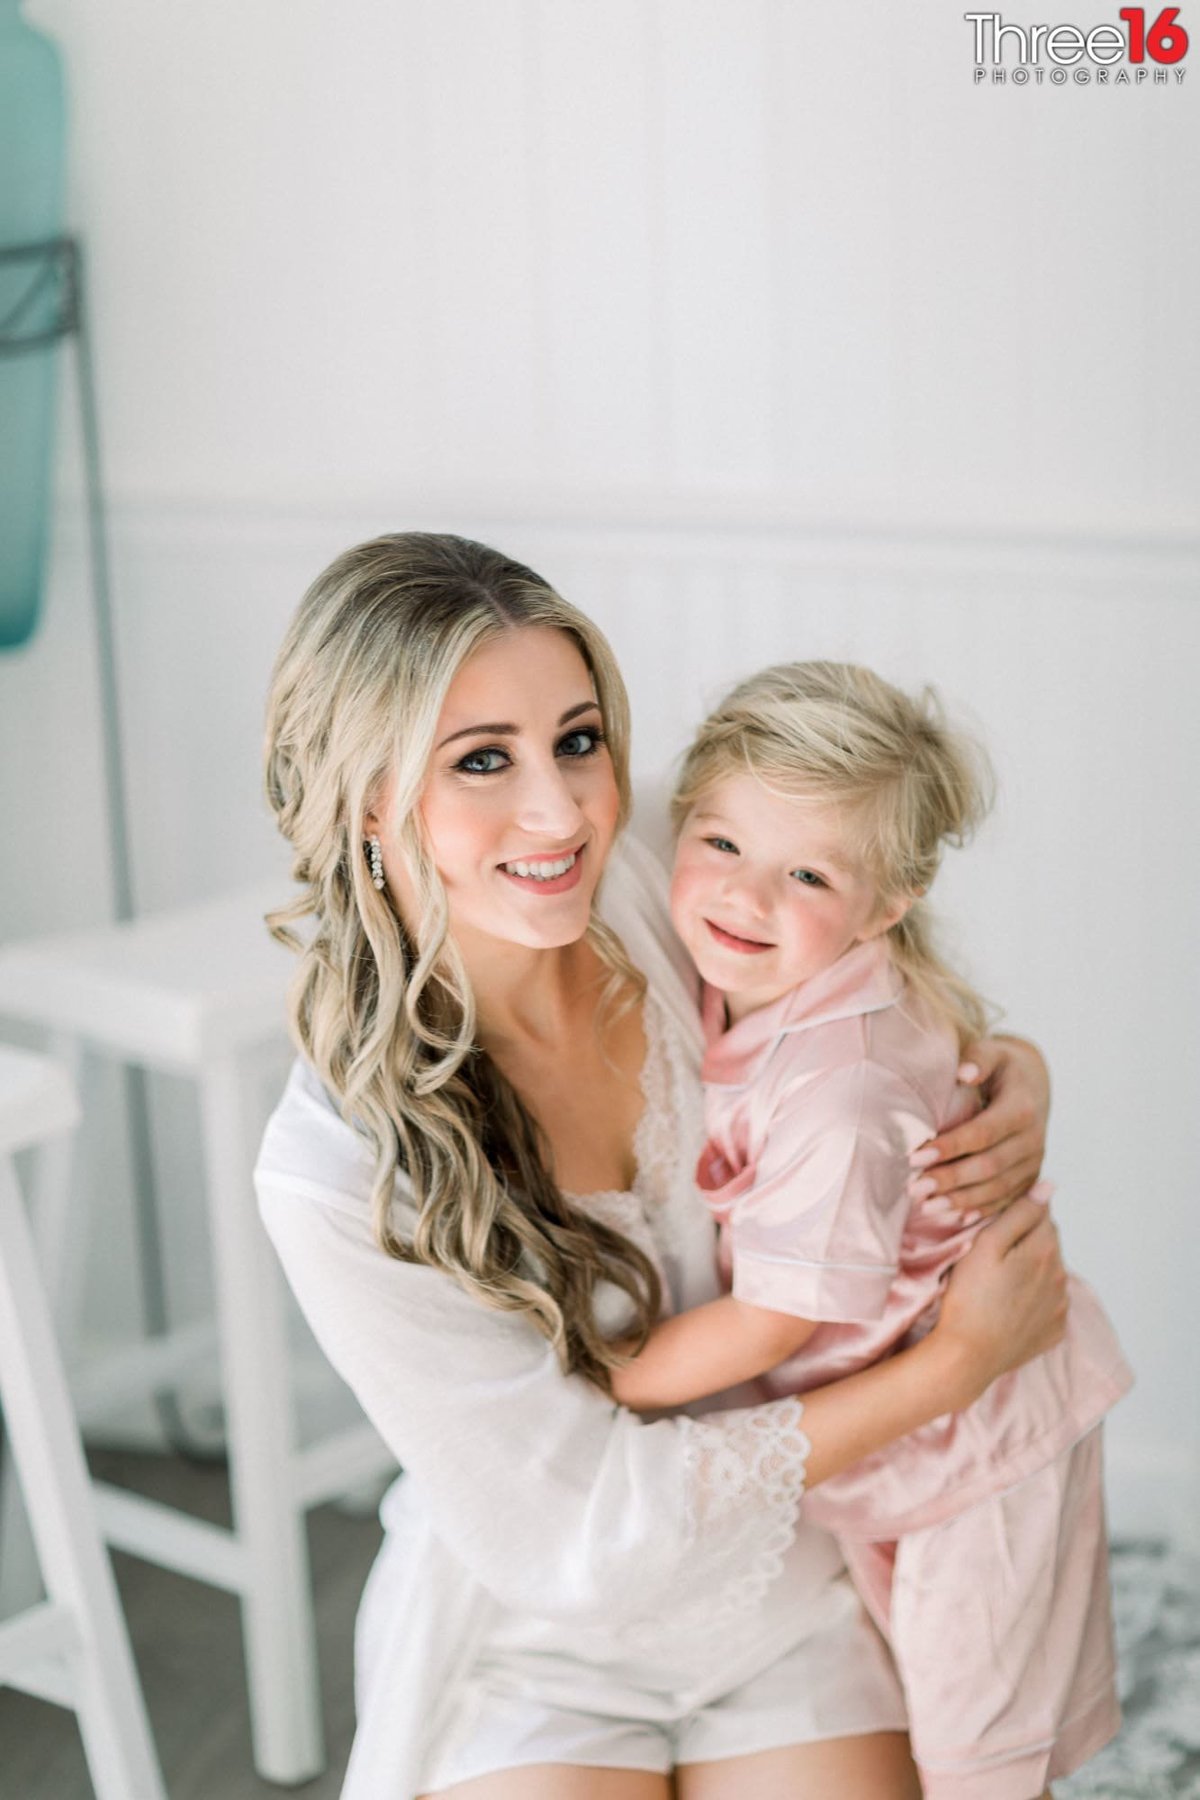 Bride to be with little girl